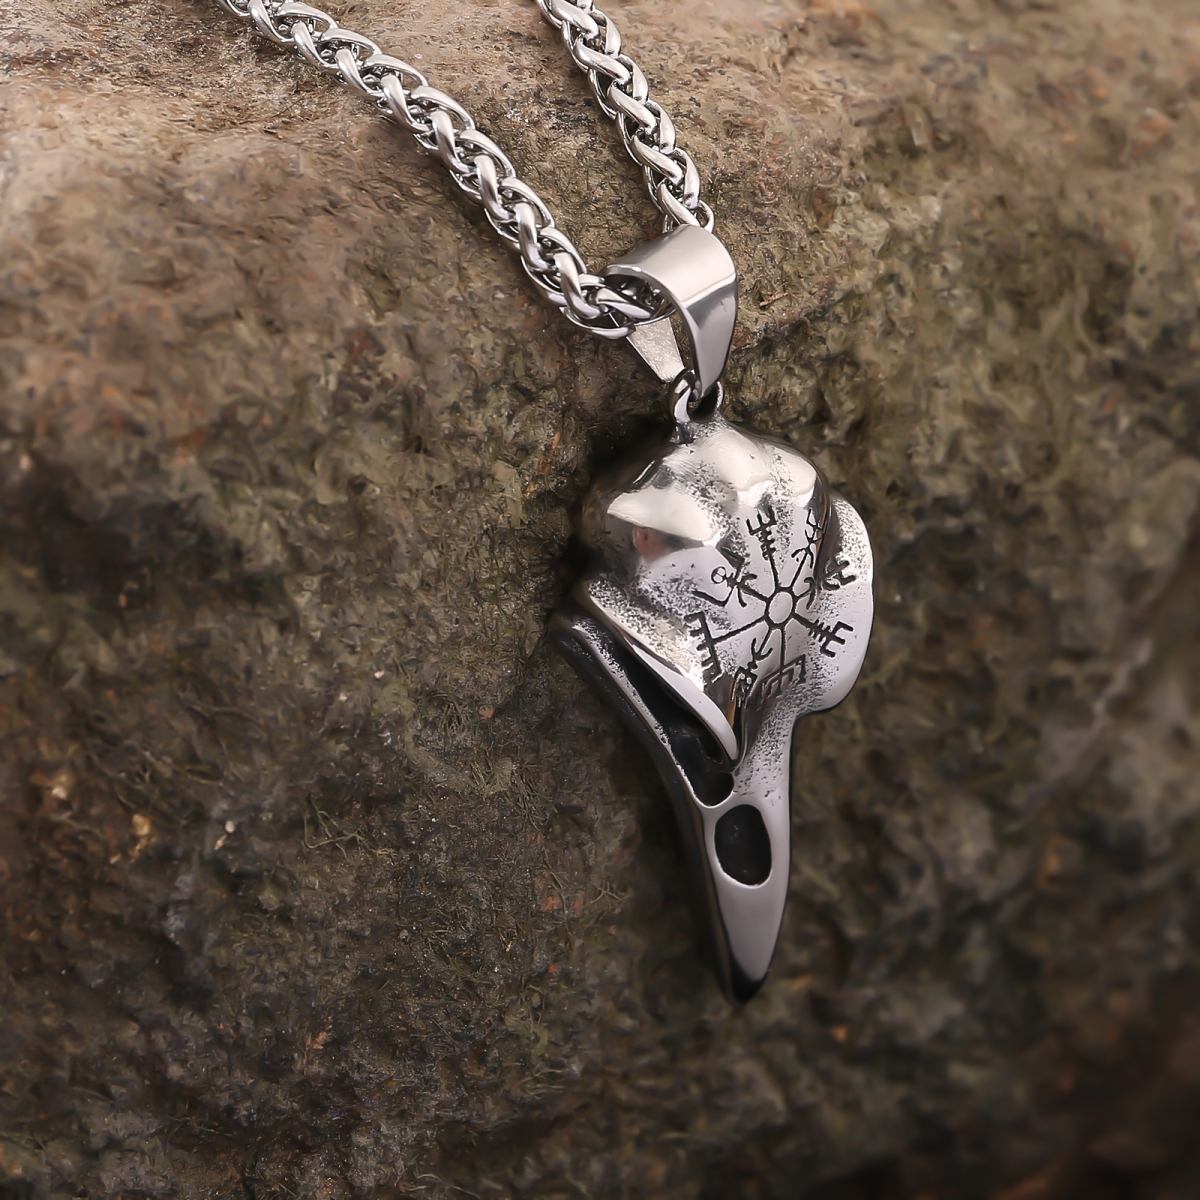 Viking jewelry raven skull-NORSECOLLECTION- Viking Jewelry,Viking Necklace,Viking Bracelet,Viking Rings,Viking Mugs,Viking Accessories,Viking Crafts